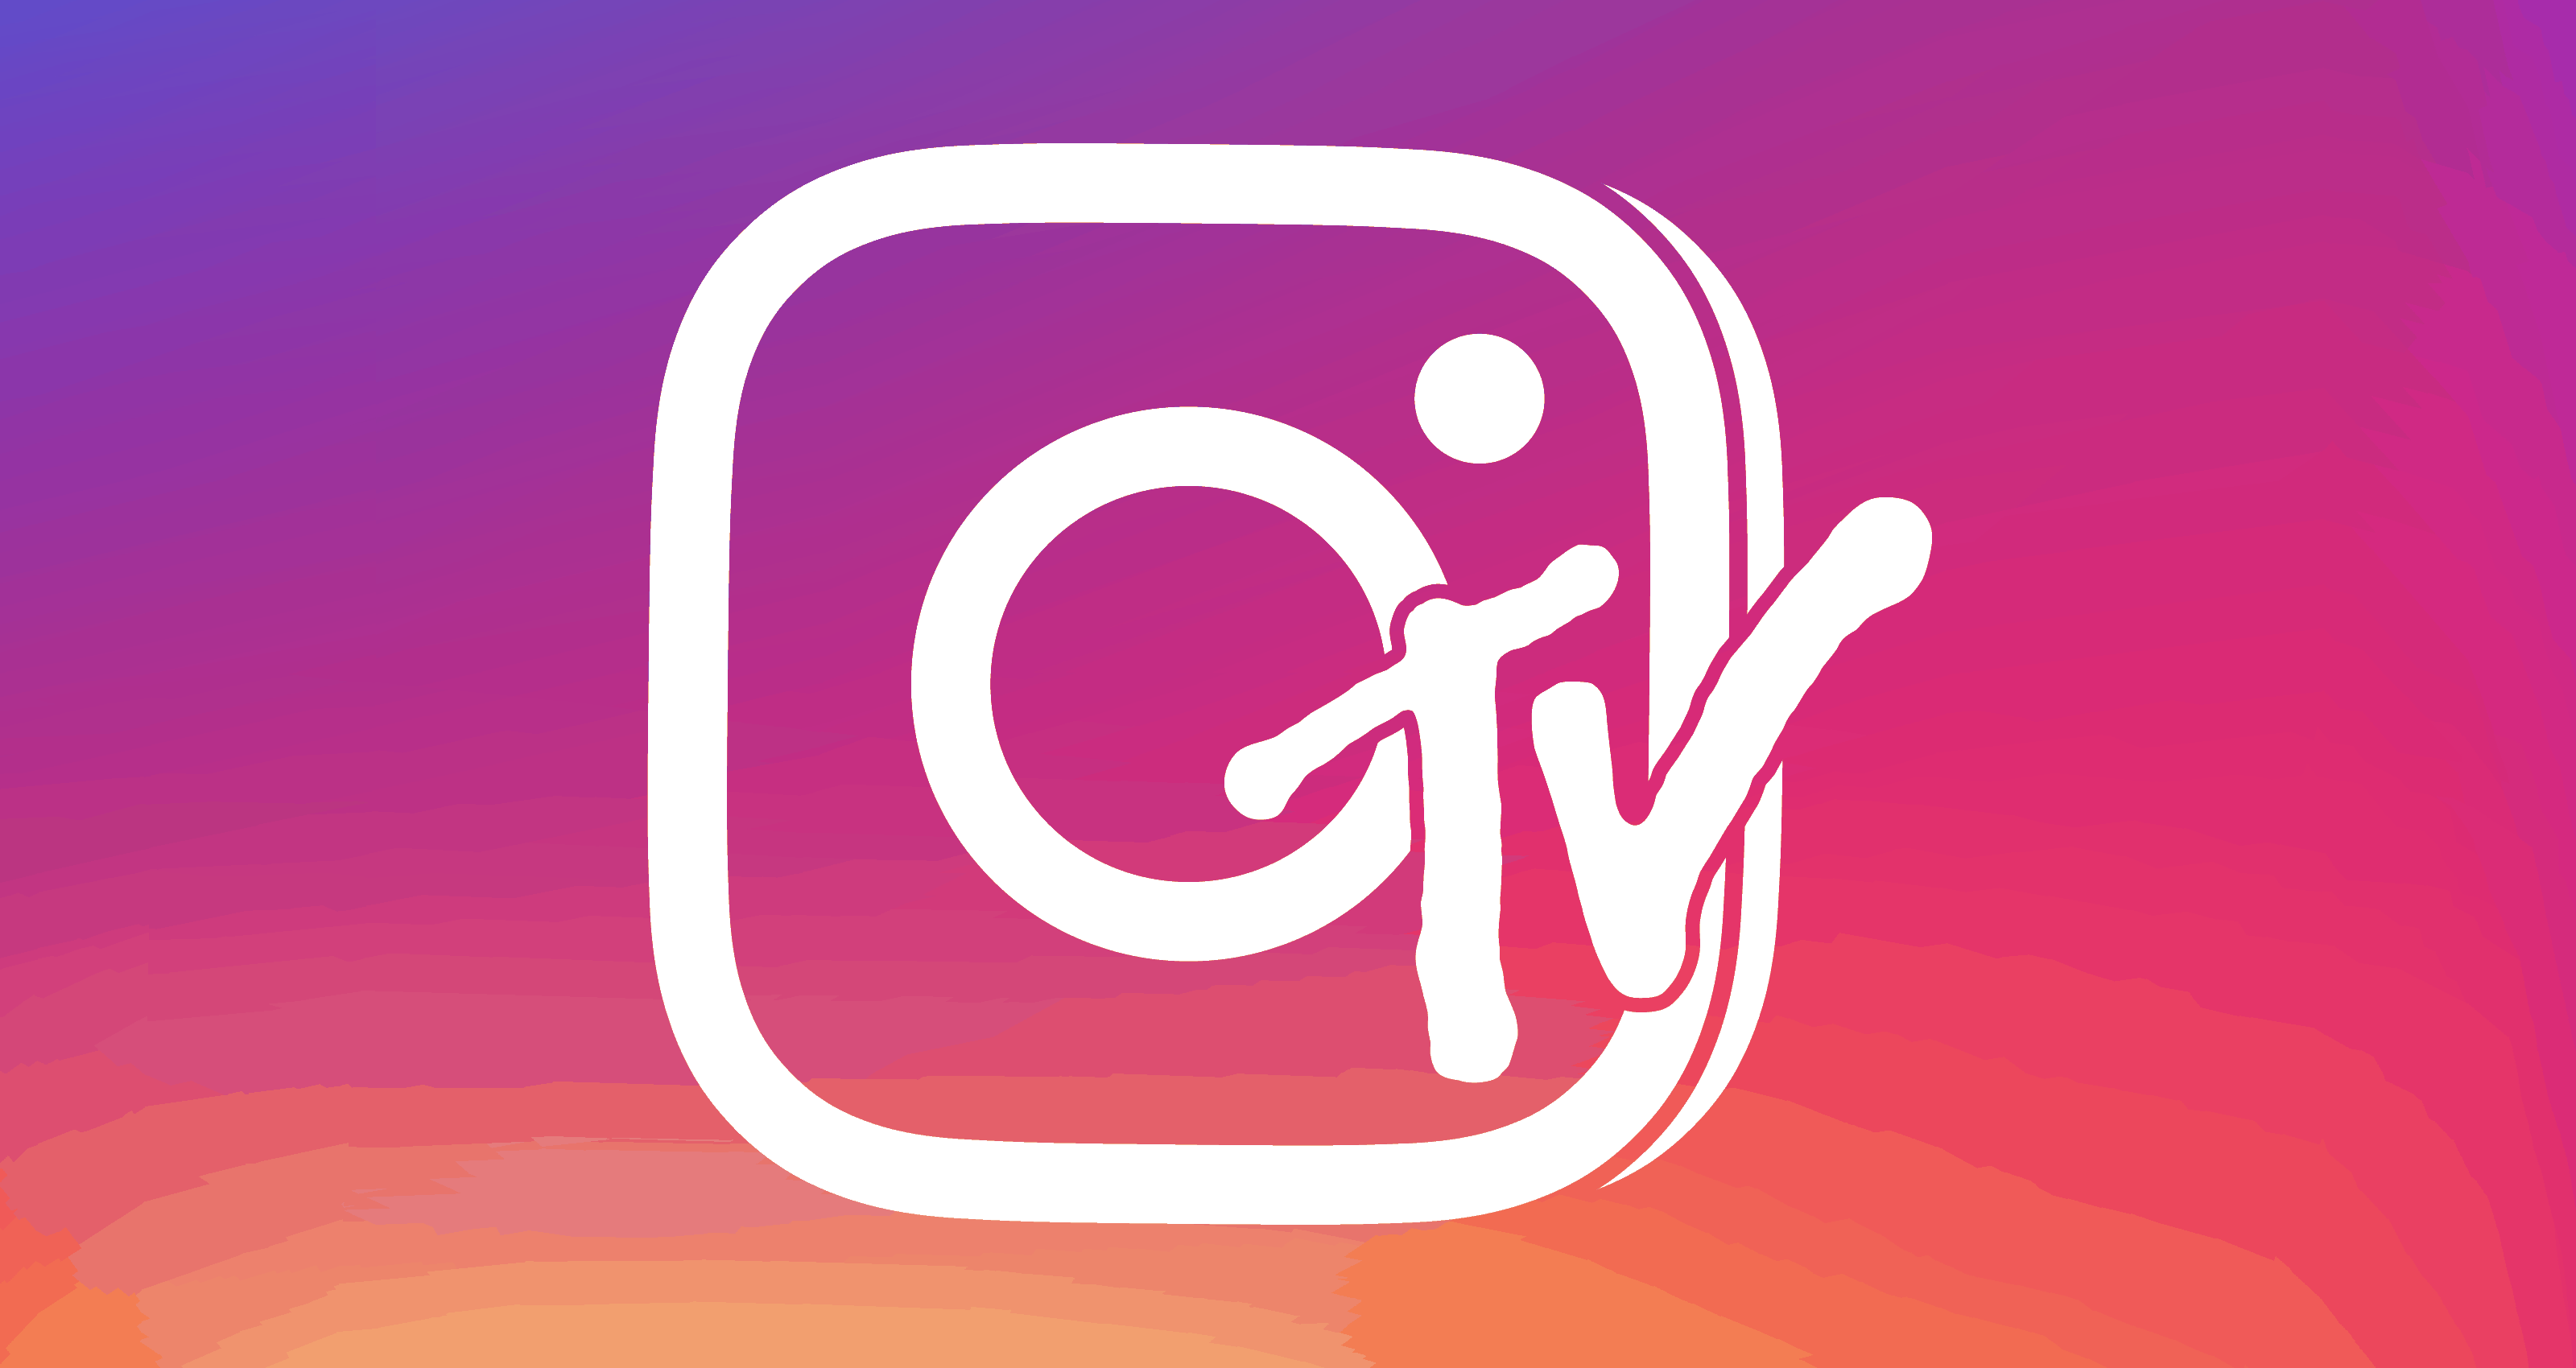 How to upload a landscape video to IGTV with background blur and no cropping